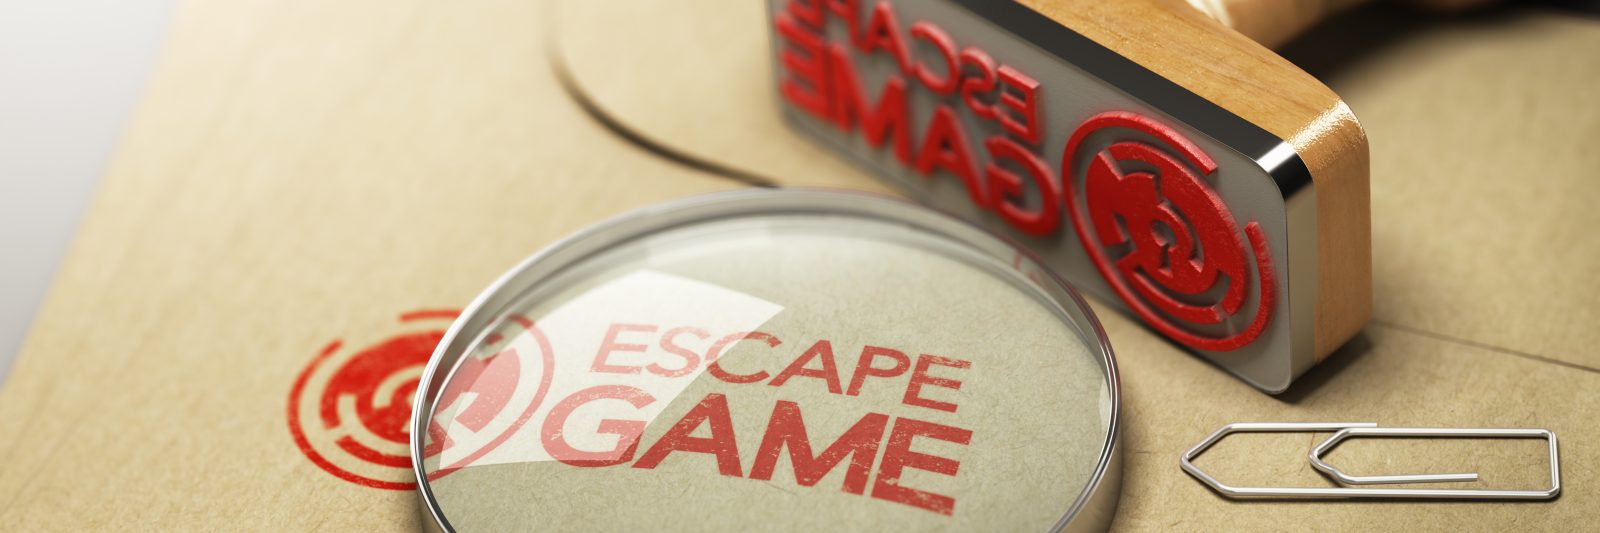 stamp with red inc reading:"Escape Game" and spy glass on manila envelope - Escape Room San Diego Valentines Day